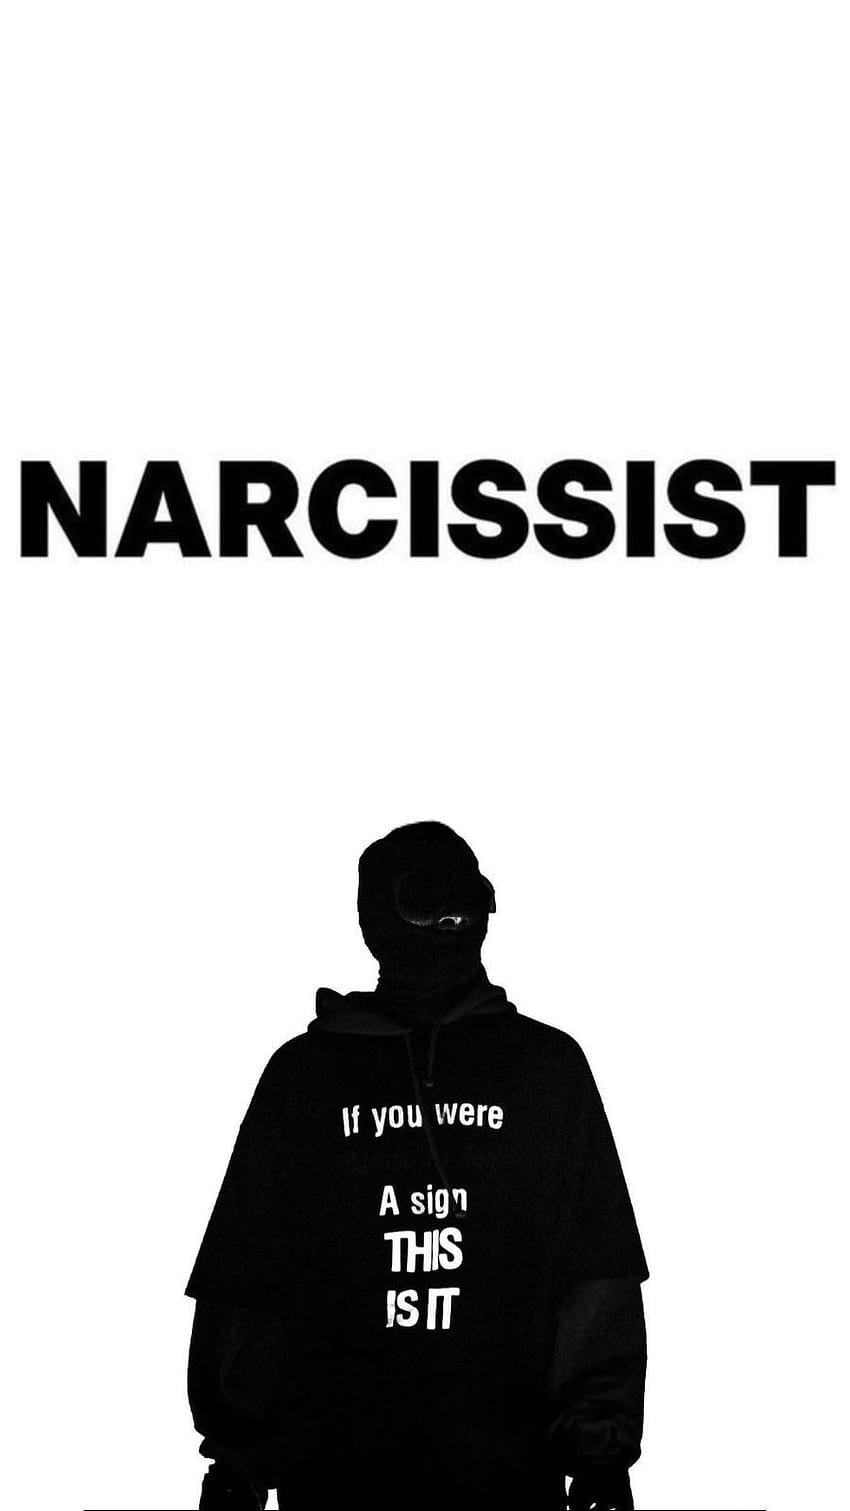 Narcissist Images Browse 9577 Stock Photos  Vectors Free Download with  Trial  Shutterstock